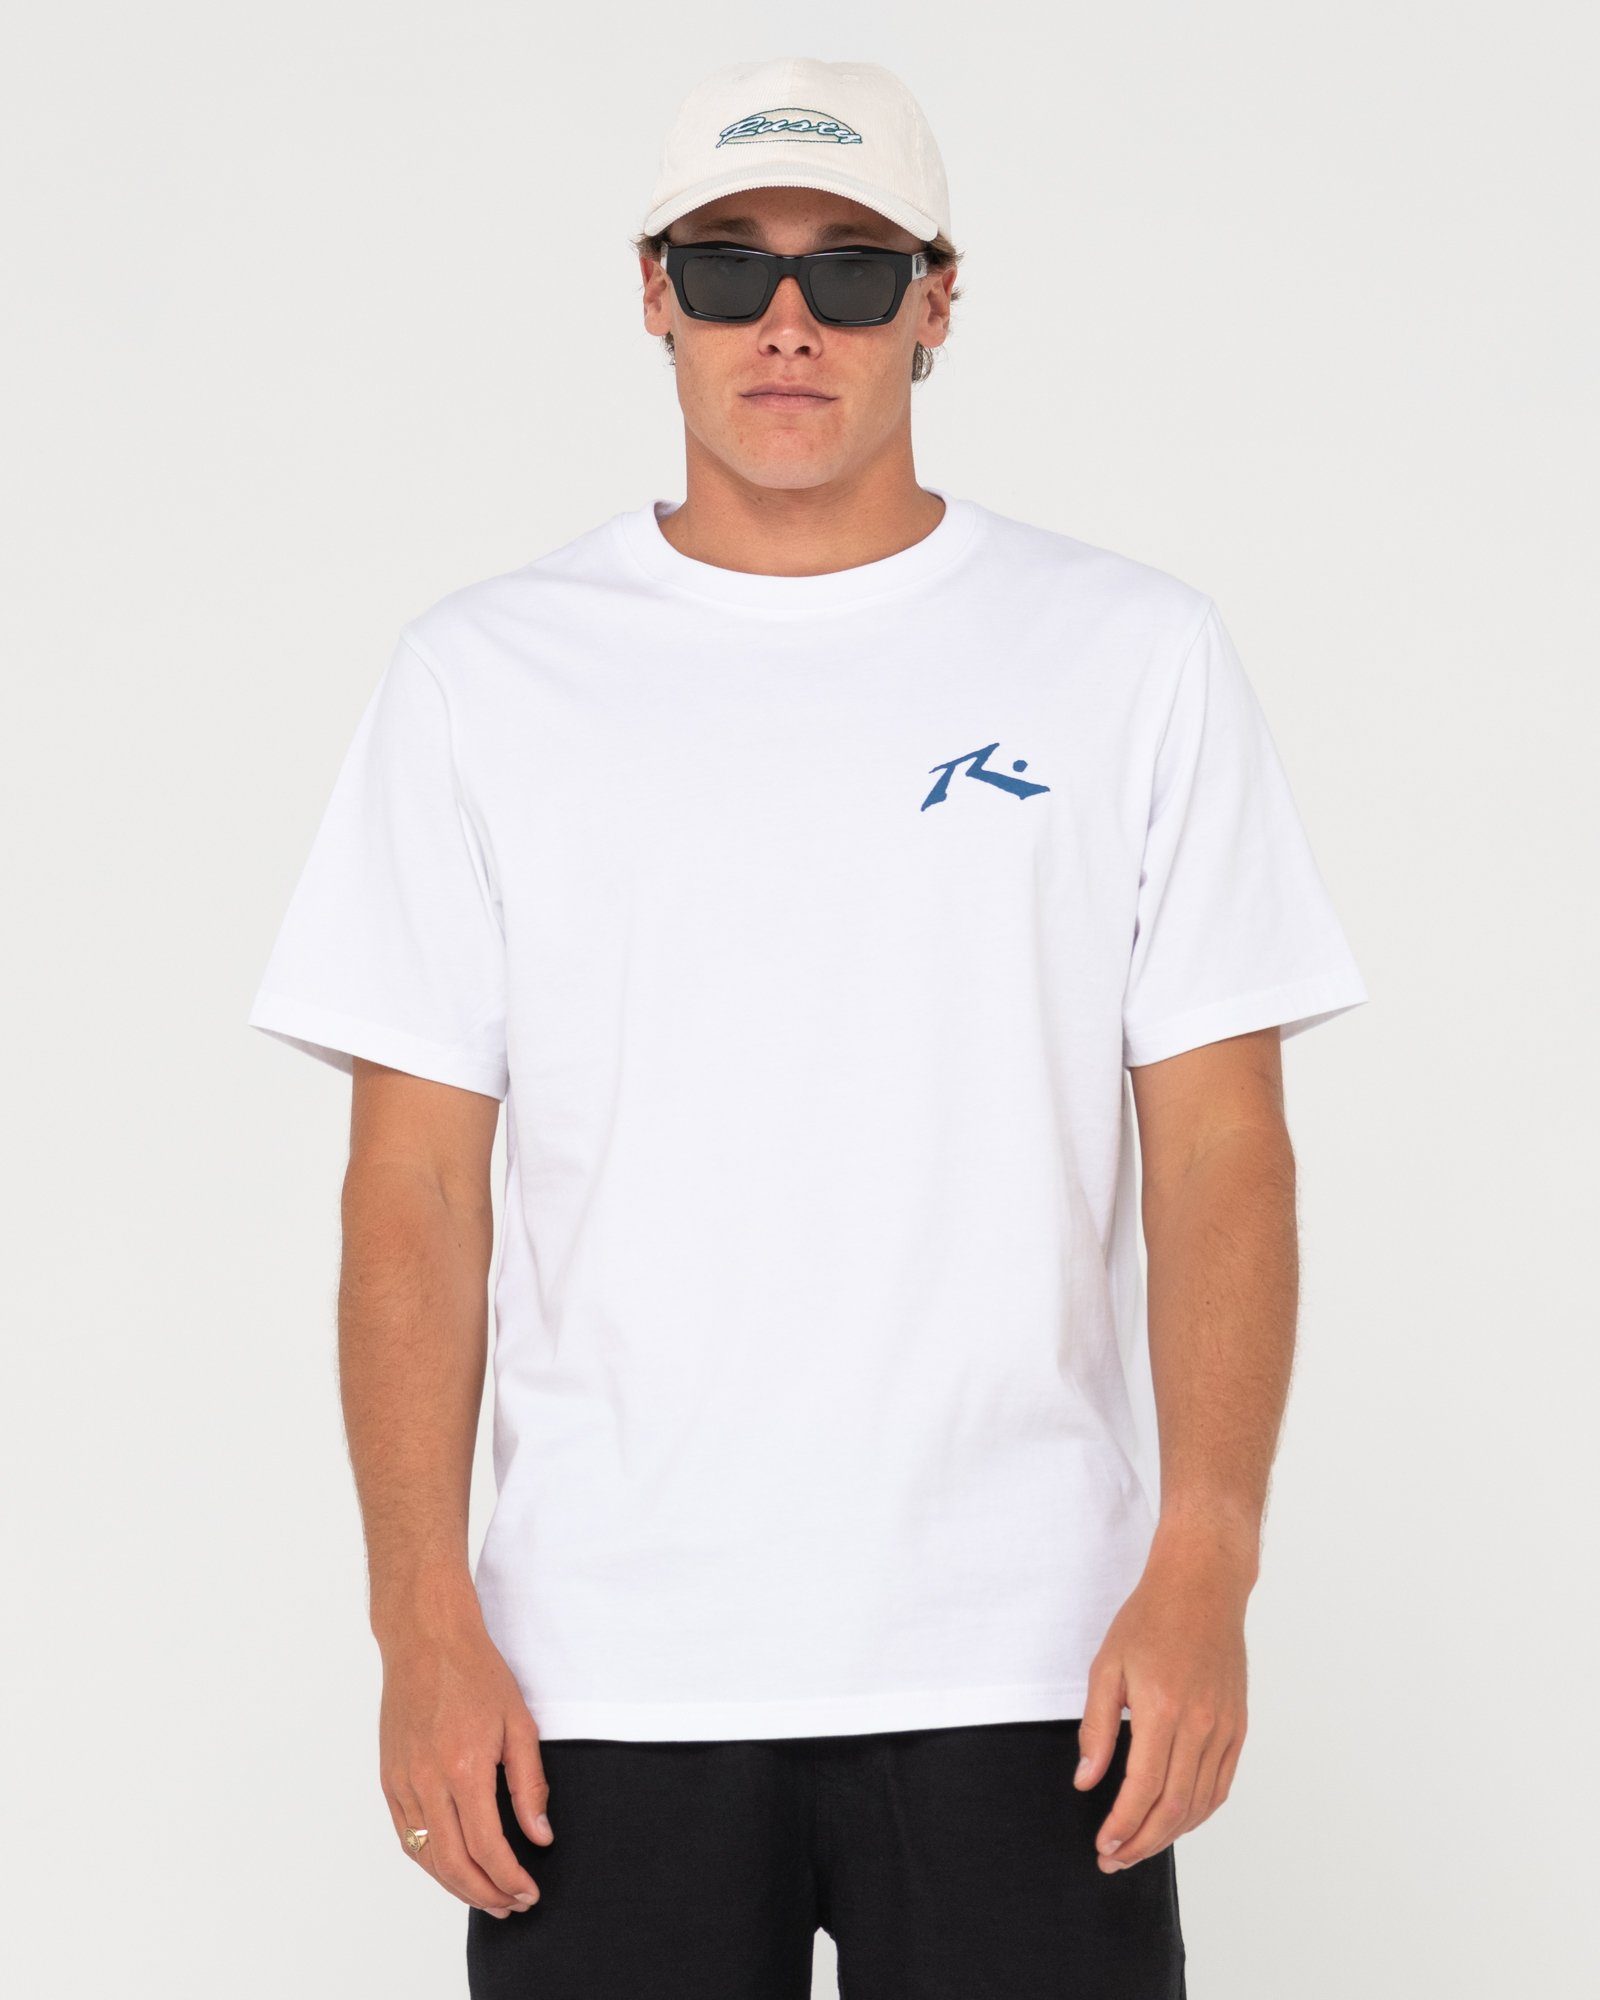 Rusty T-Shirt COMPETITION SHORT SLEEVE TEE White / Blue